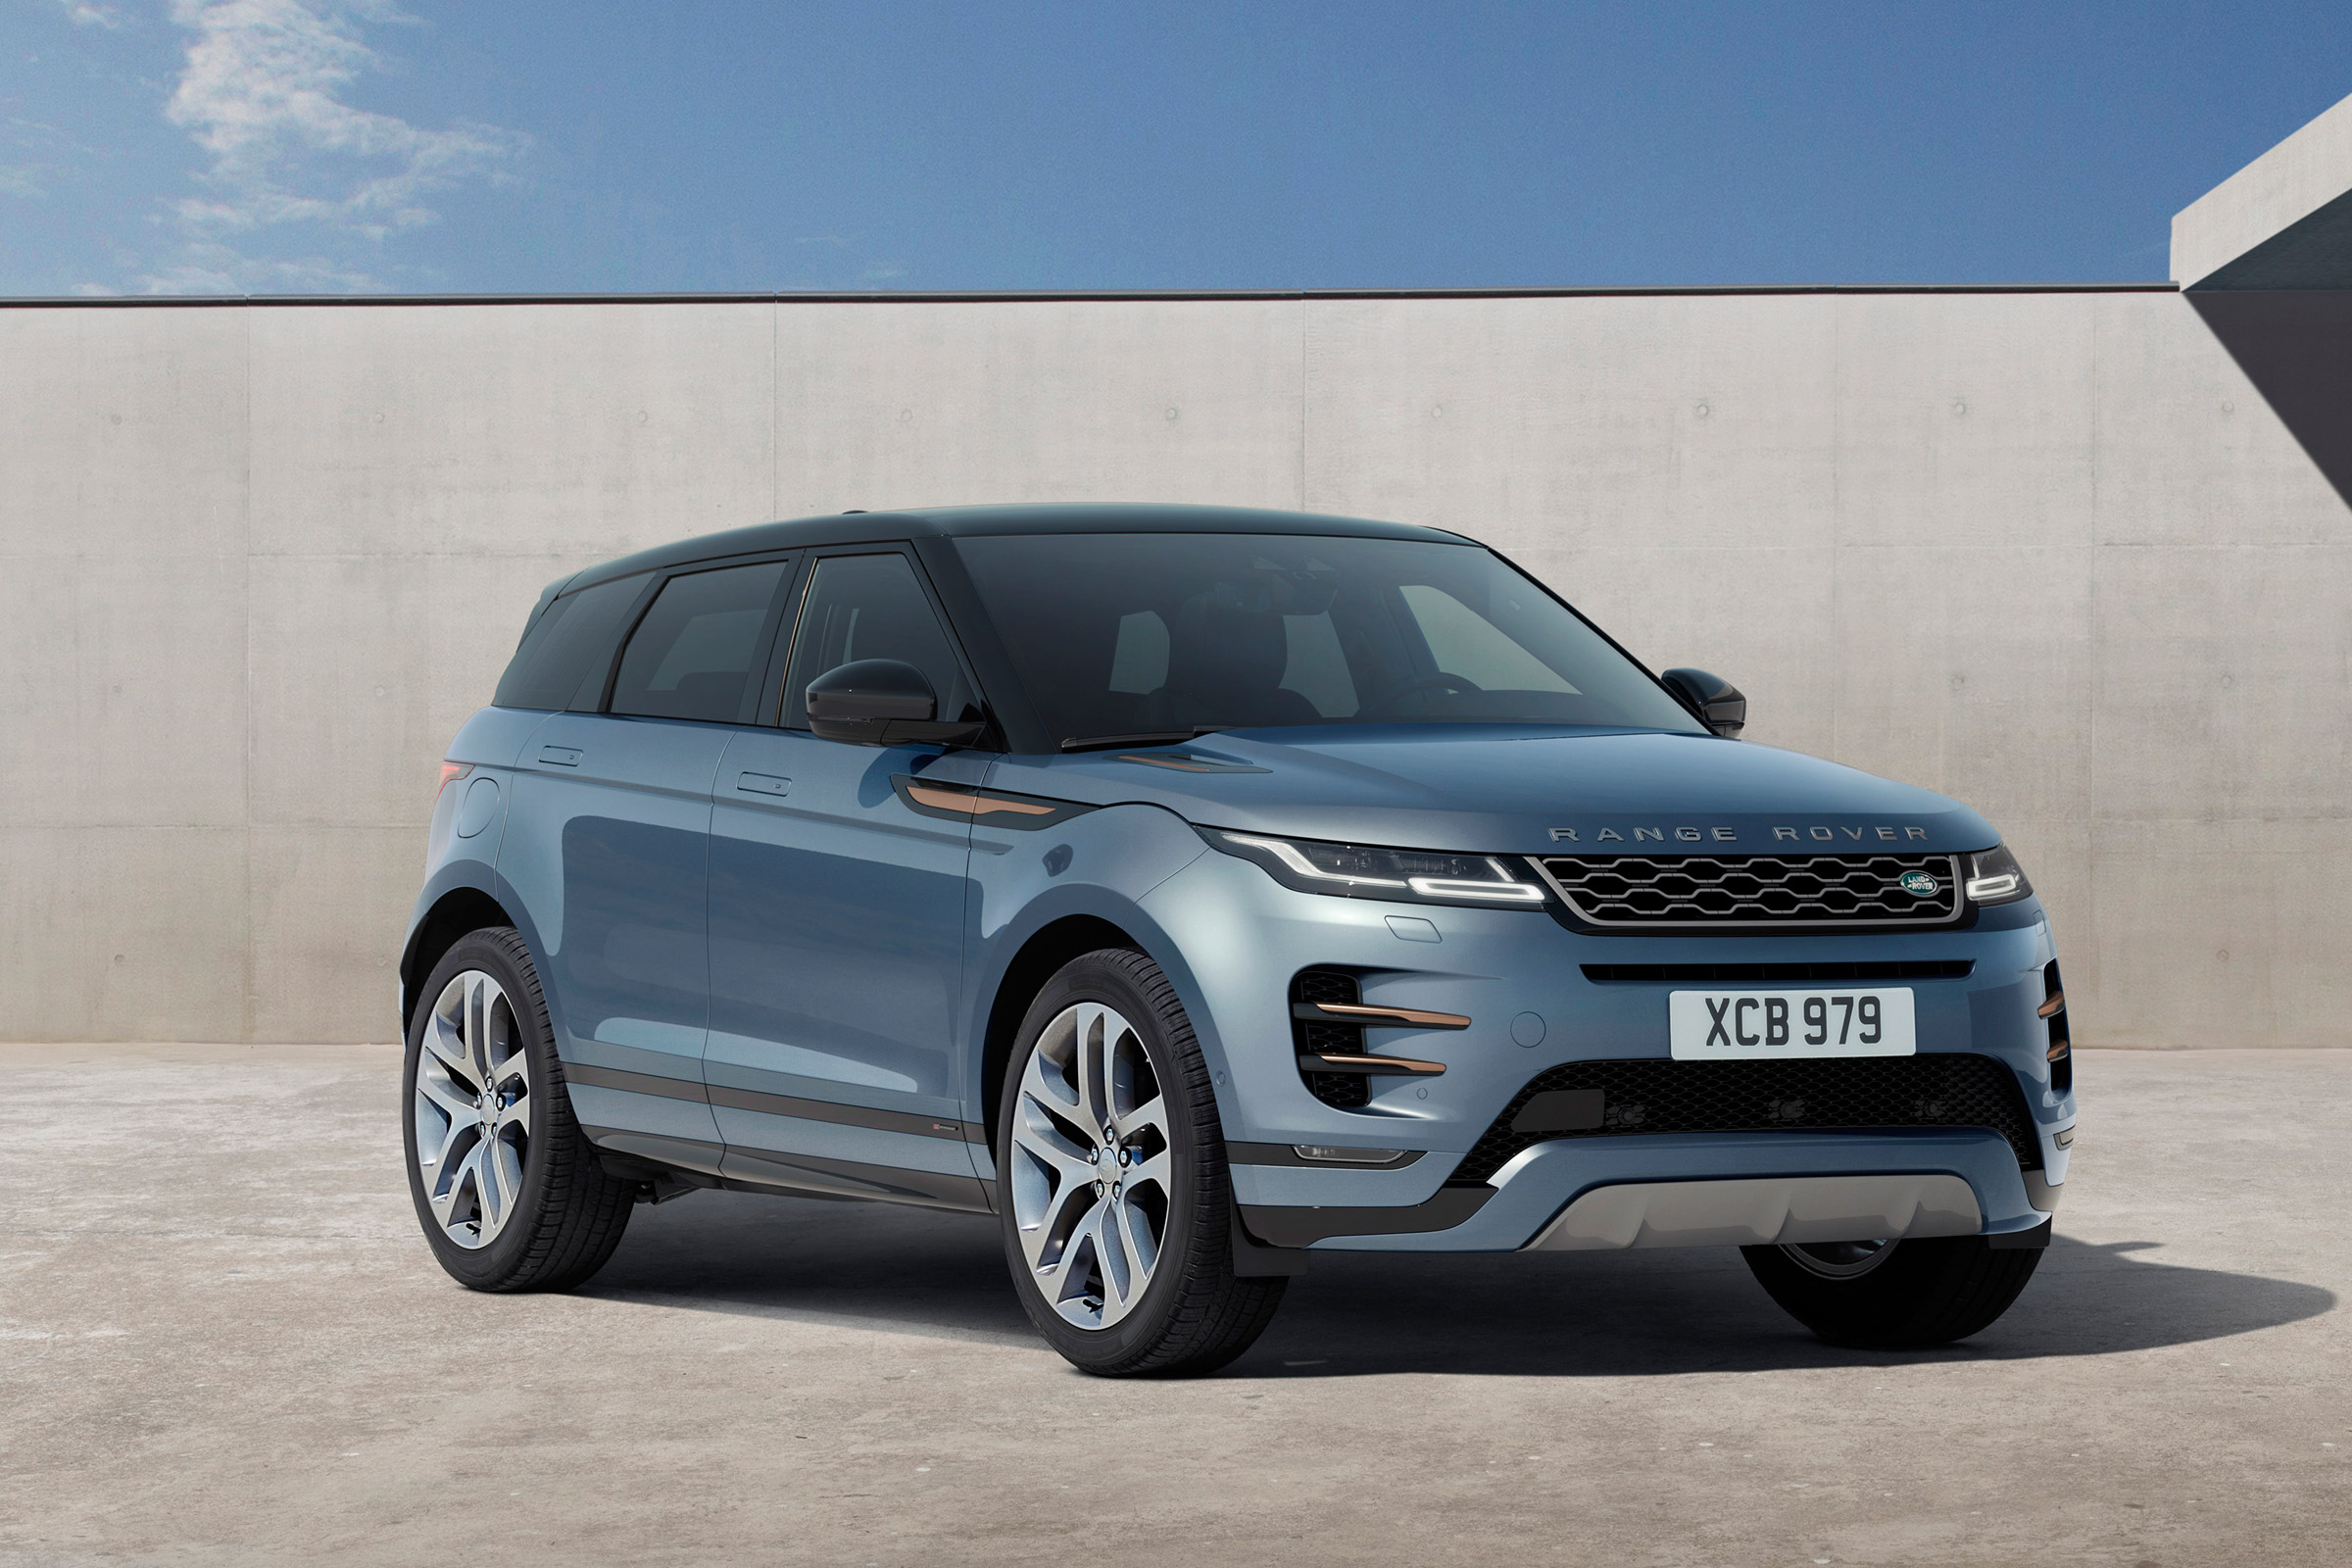 Range Rover Evoque 2019 Dimensions  : Range Rover Evoque 2019 Has Been Revealed In The Uk Along With Its Full Price, Specs And Release Date.